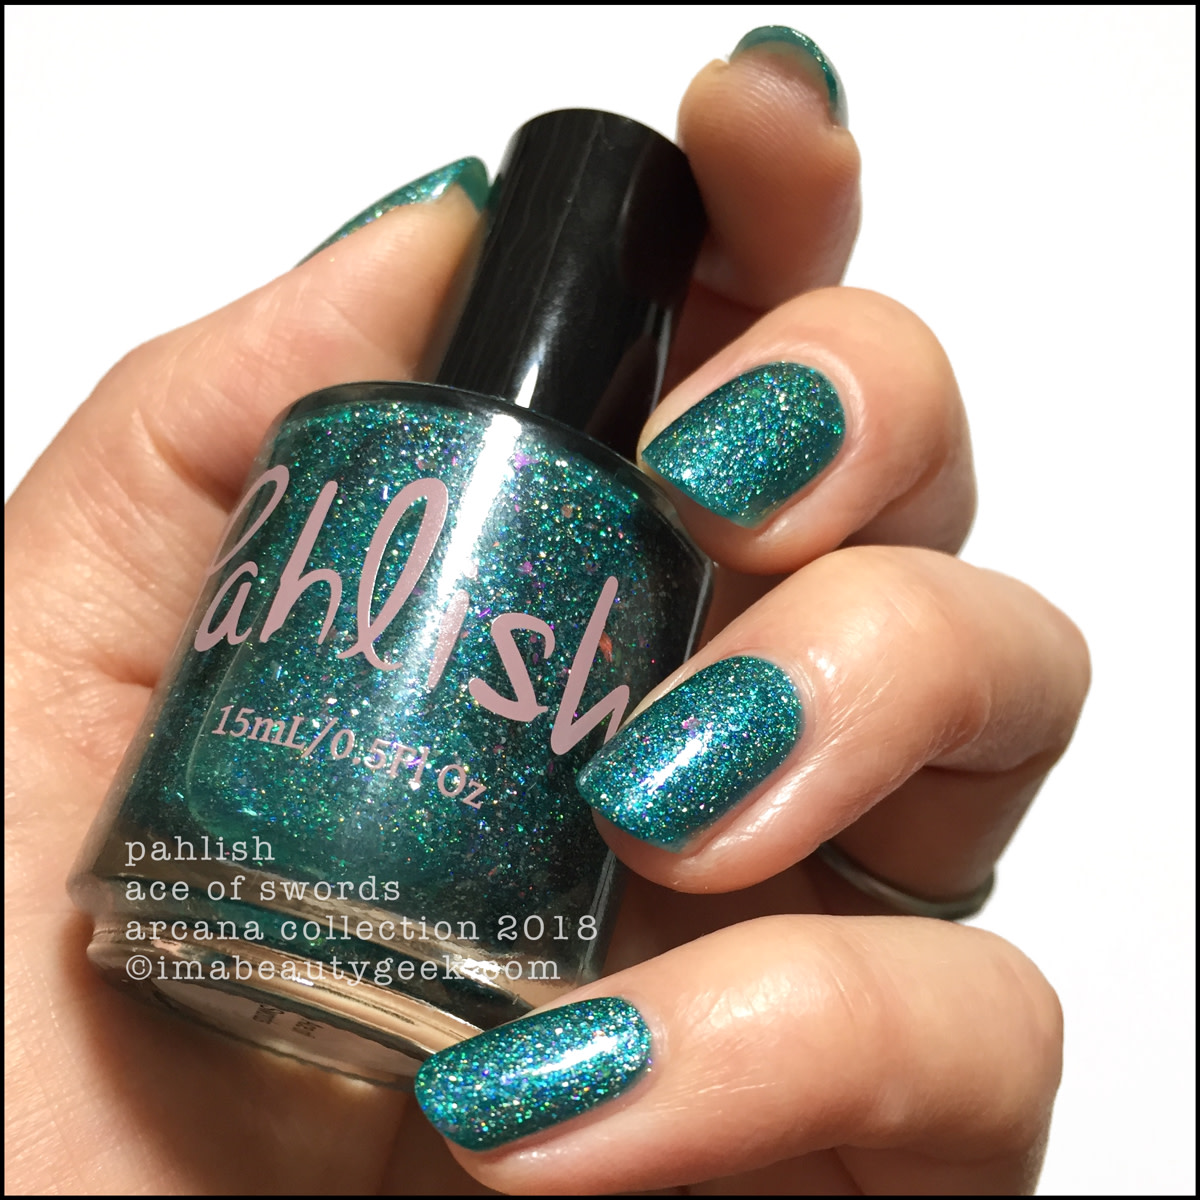 Pahlish Ace of Swords 2 - Pahlish Arcana Collection Swatches Review 2018